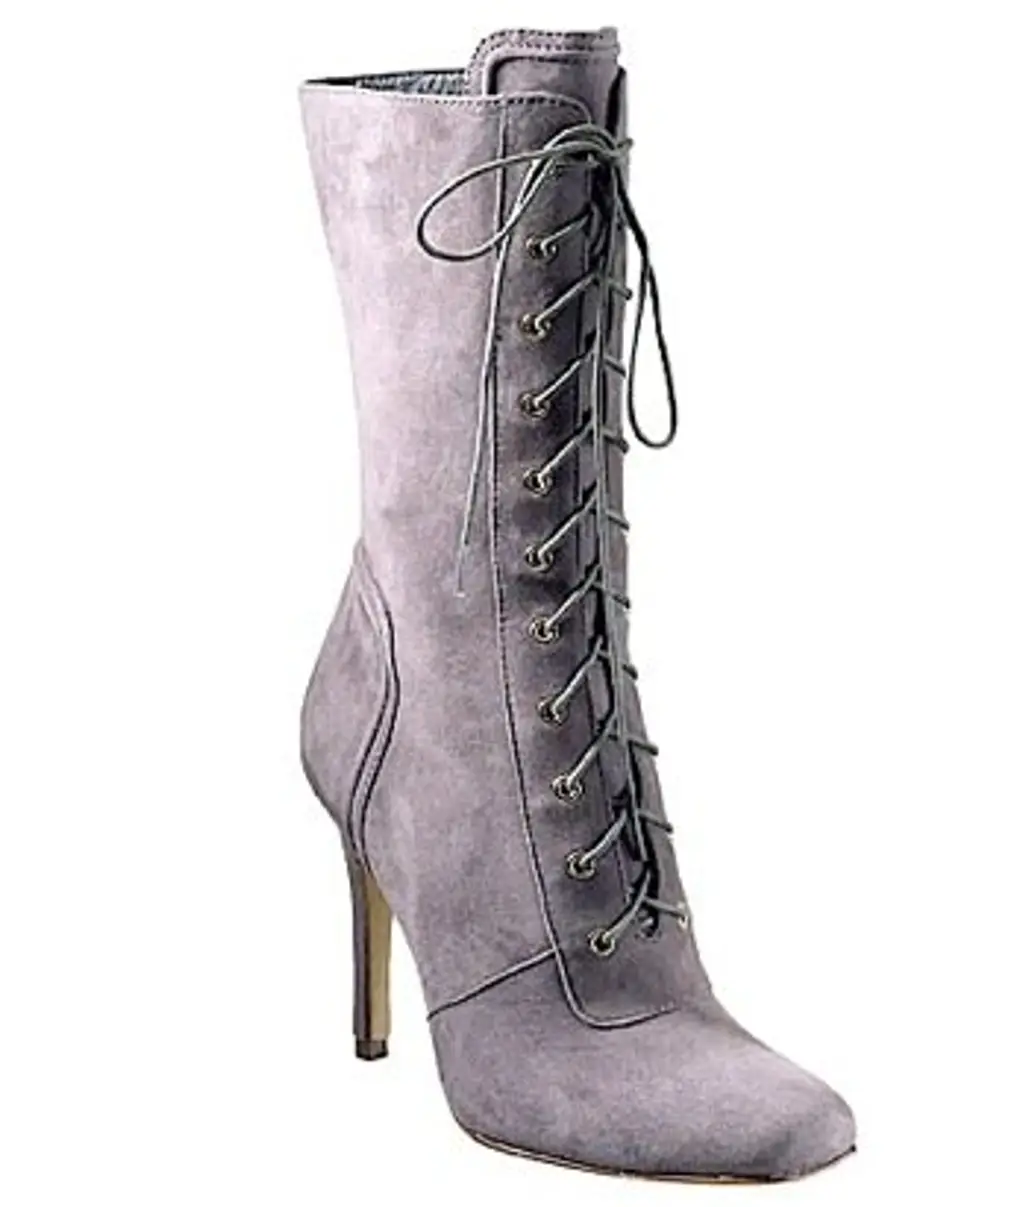 Nine West "Lazer" Laced up Boots